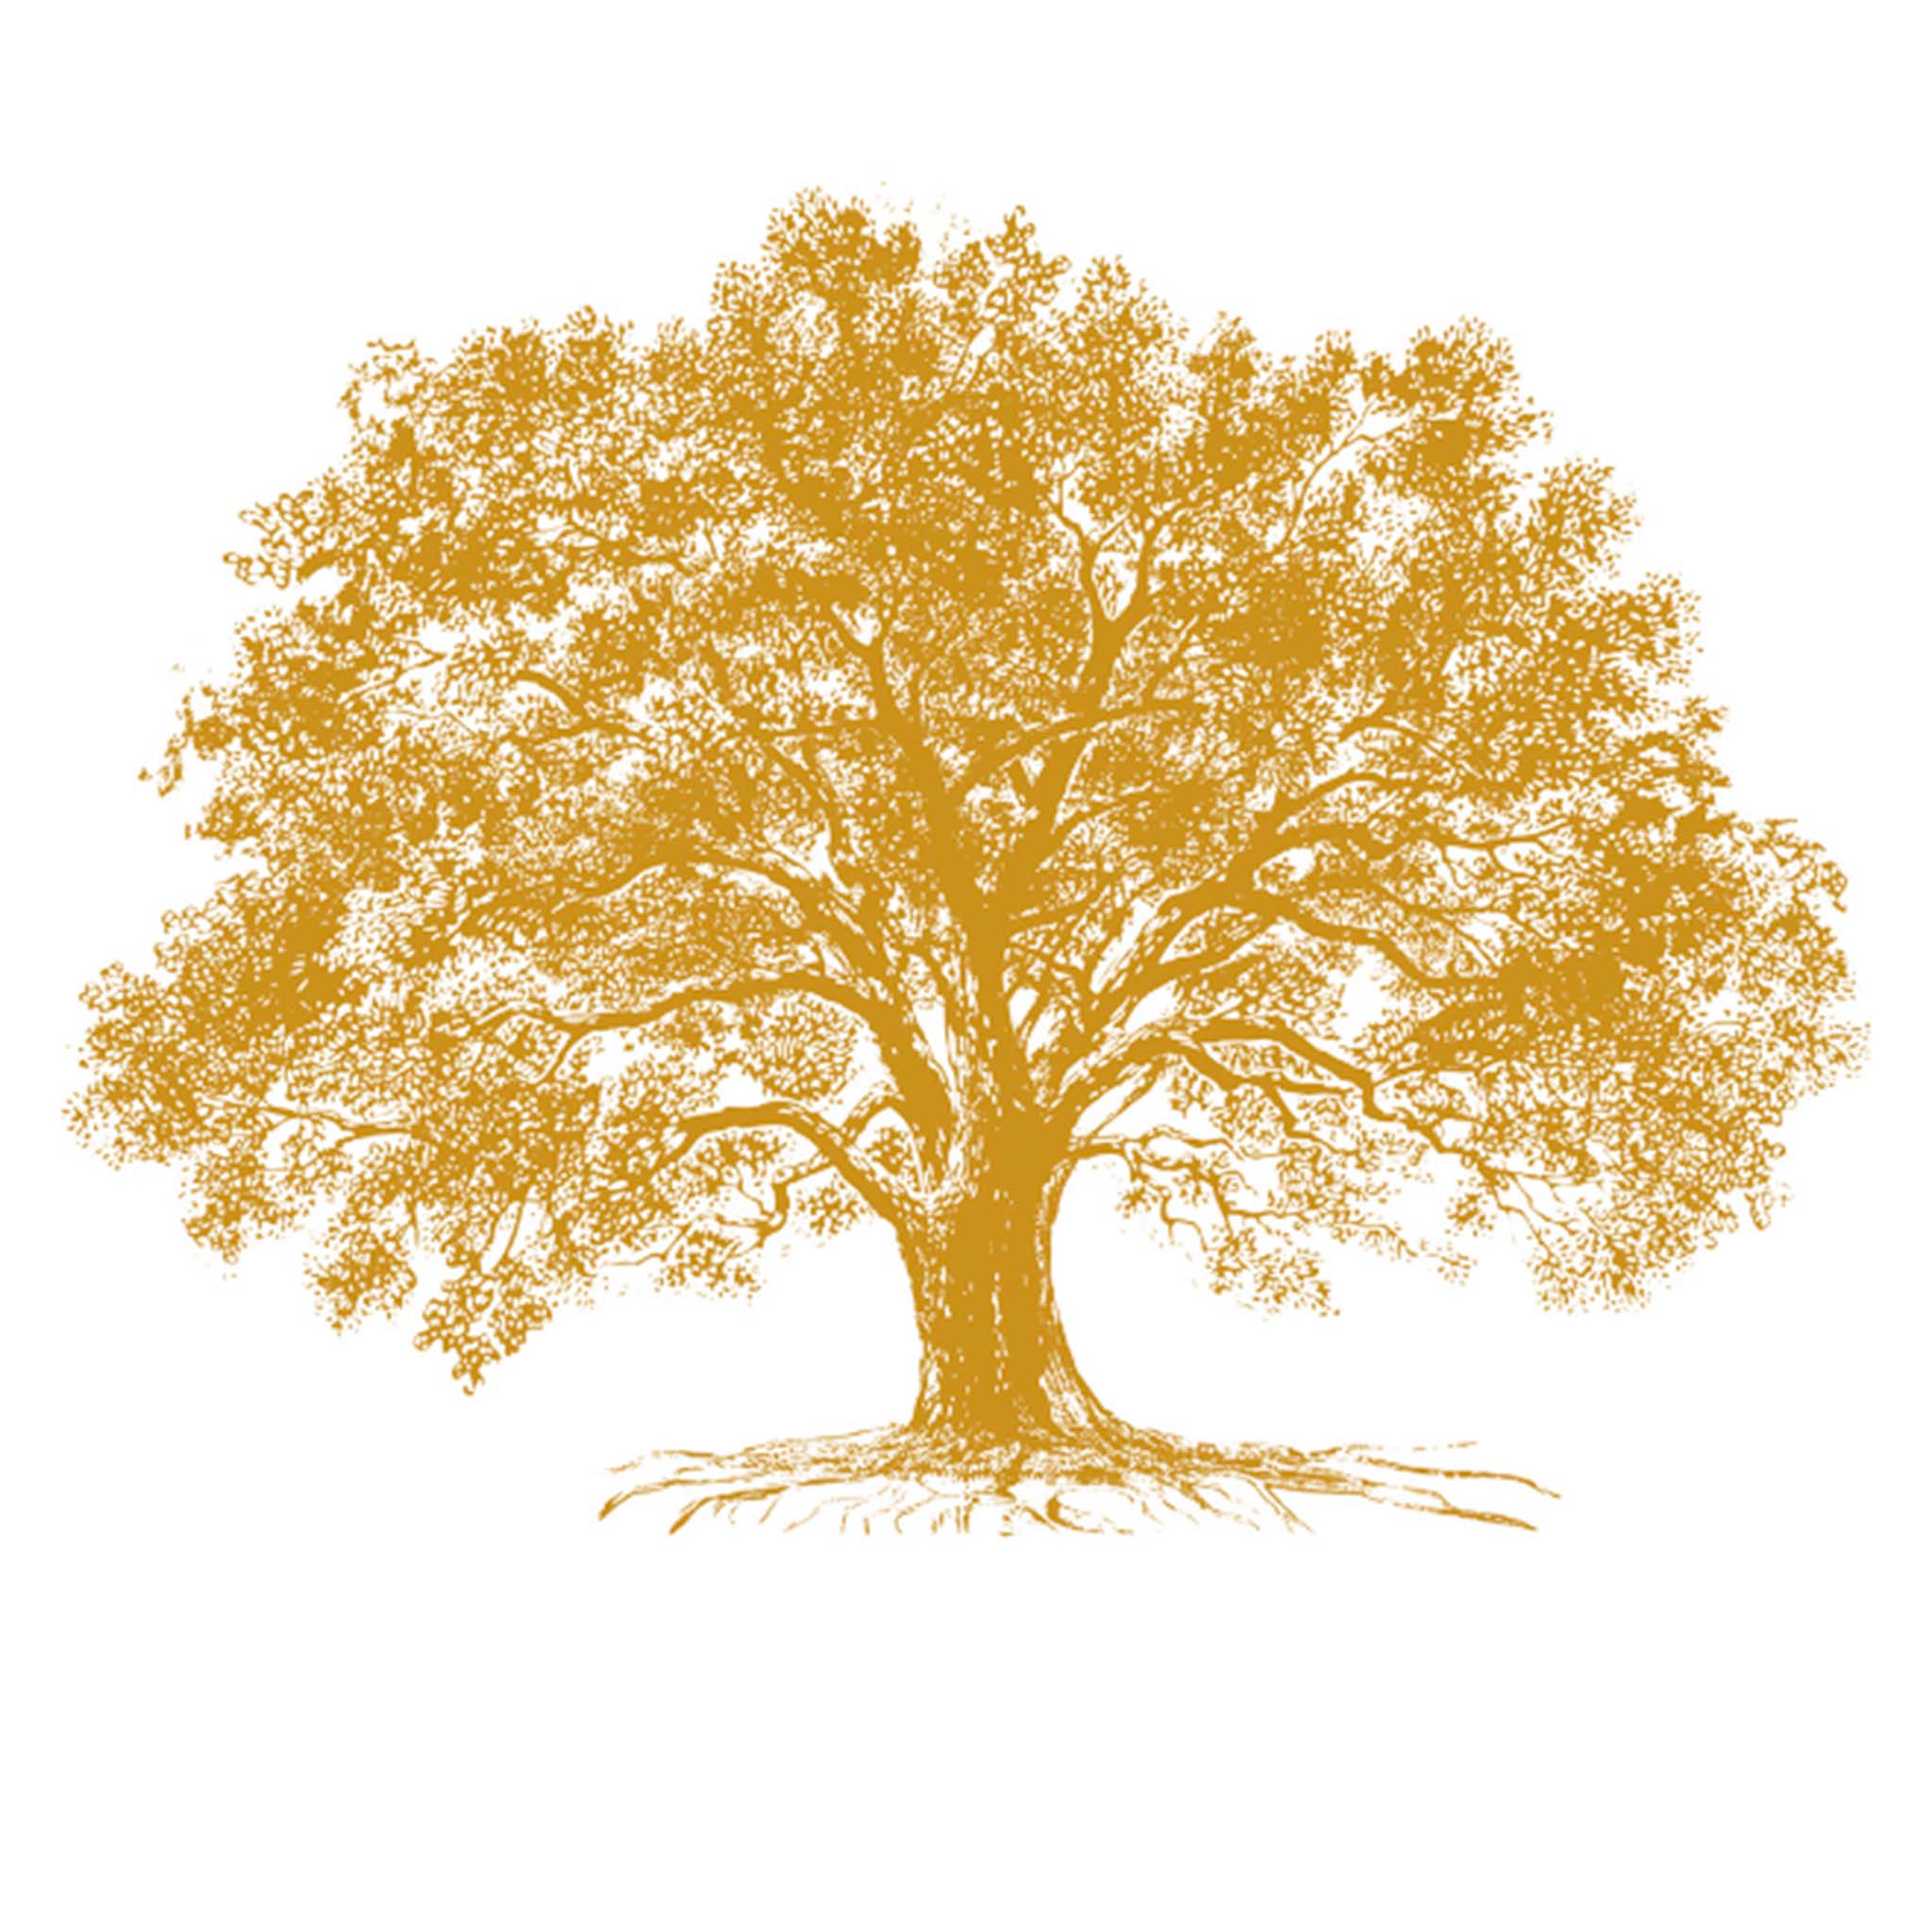 Rub-on transfer of a large full grown tree in gold leaf is against a white background.